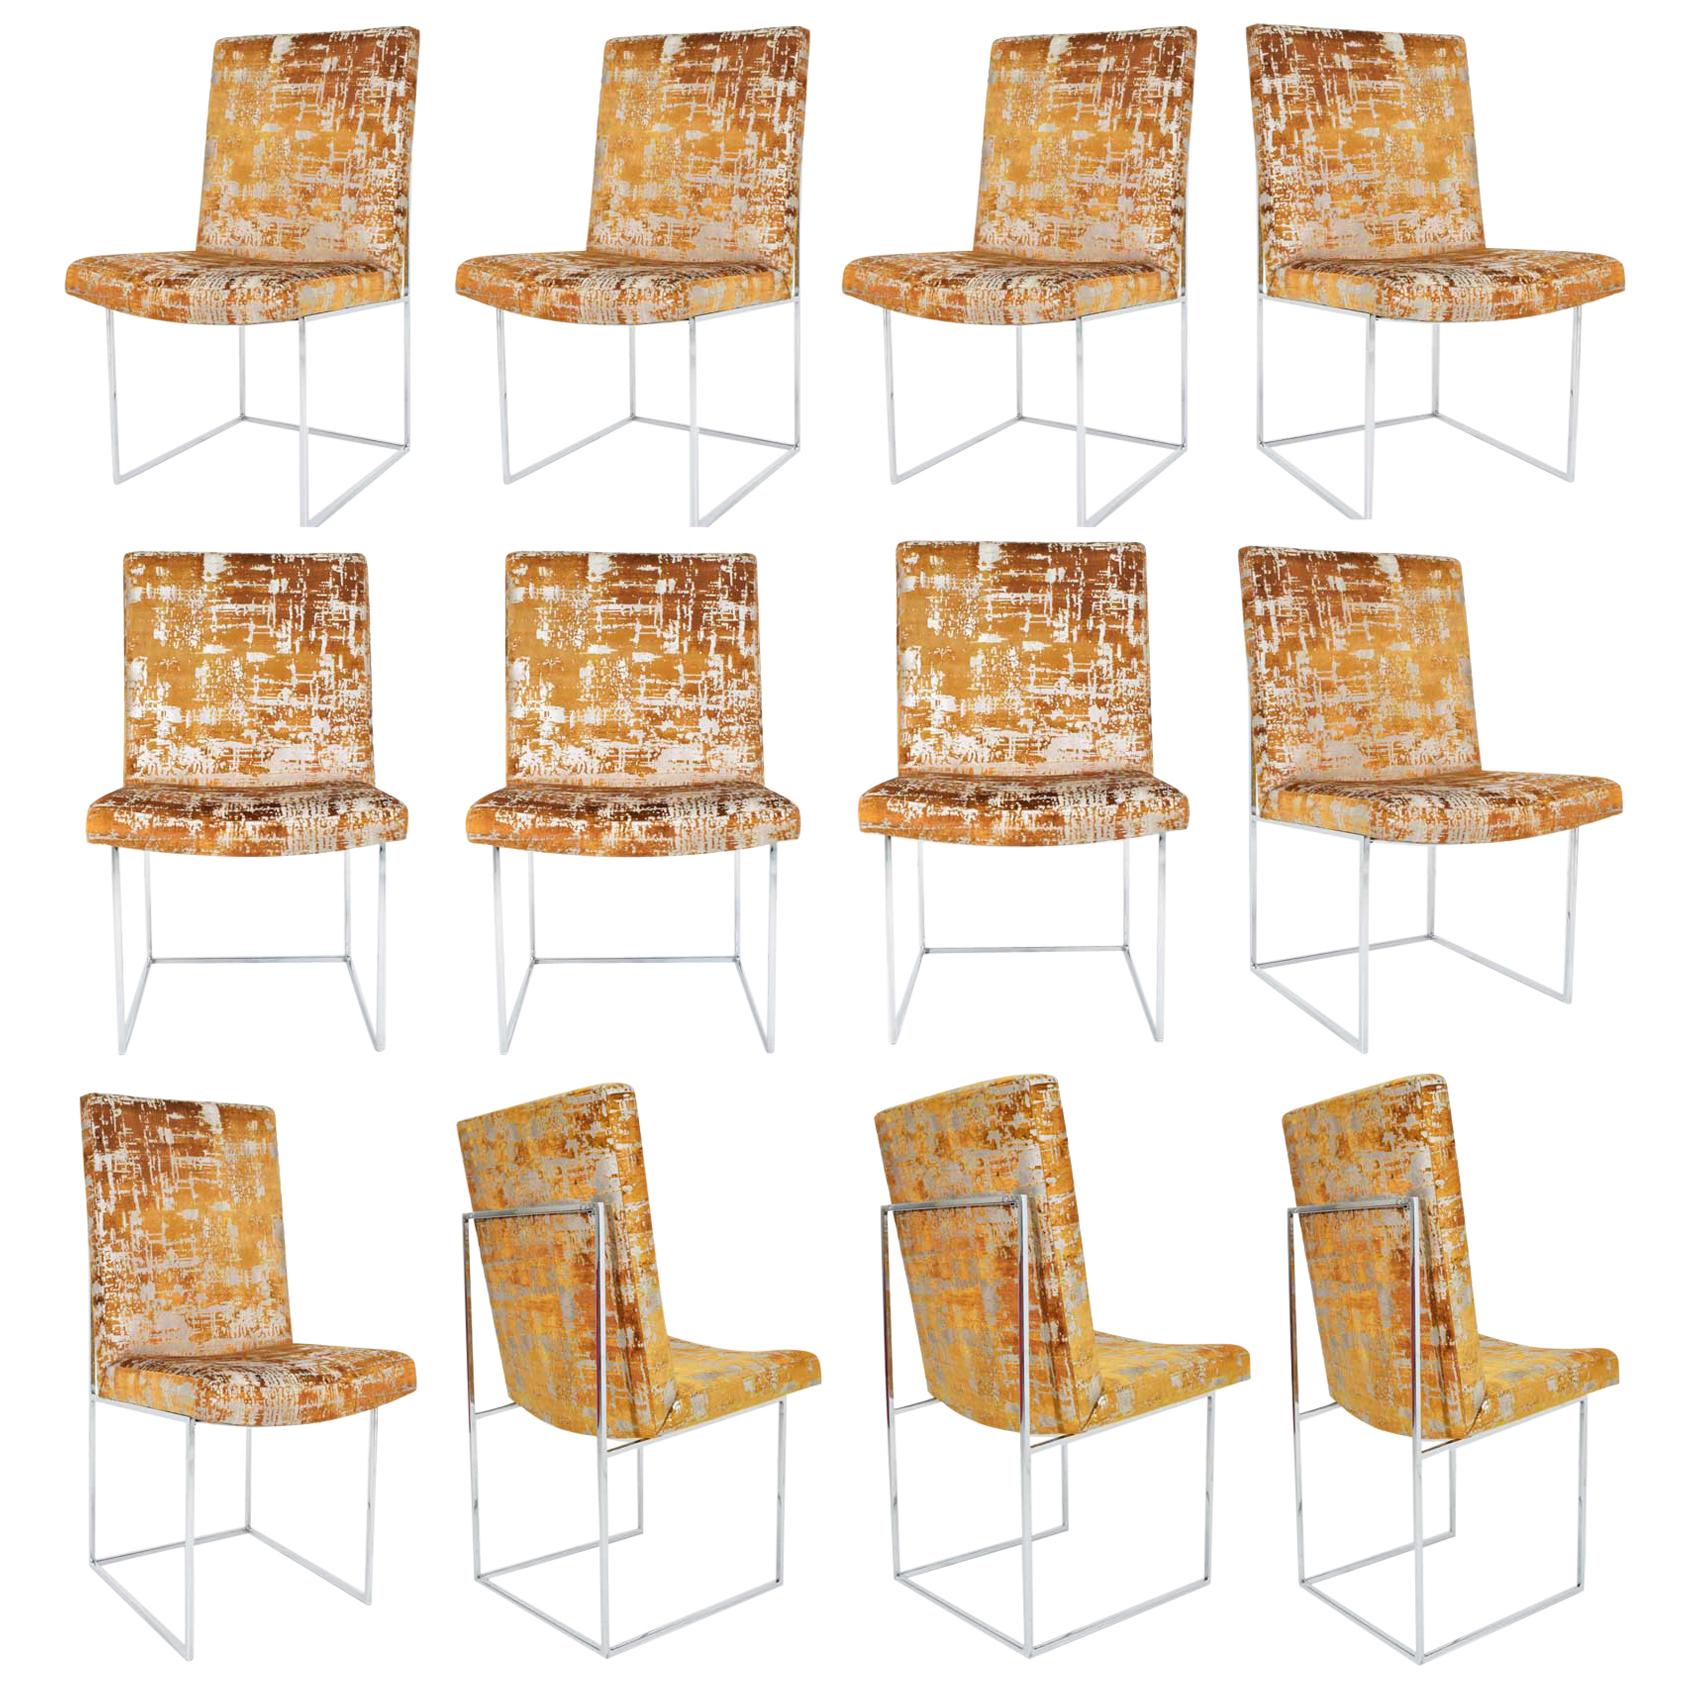 Milo Baughman Thin Frame Chrome Dining Chair in Gold Metallic, by Pairs up to 12